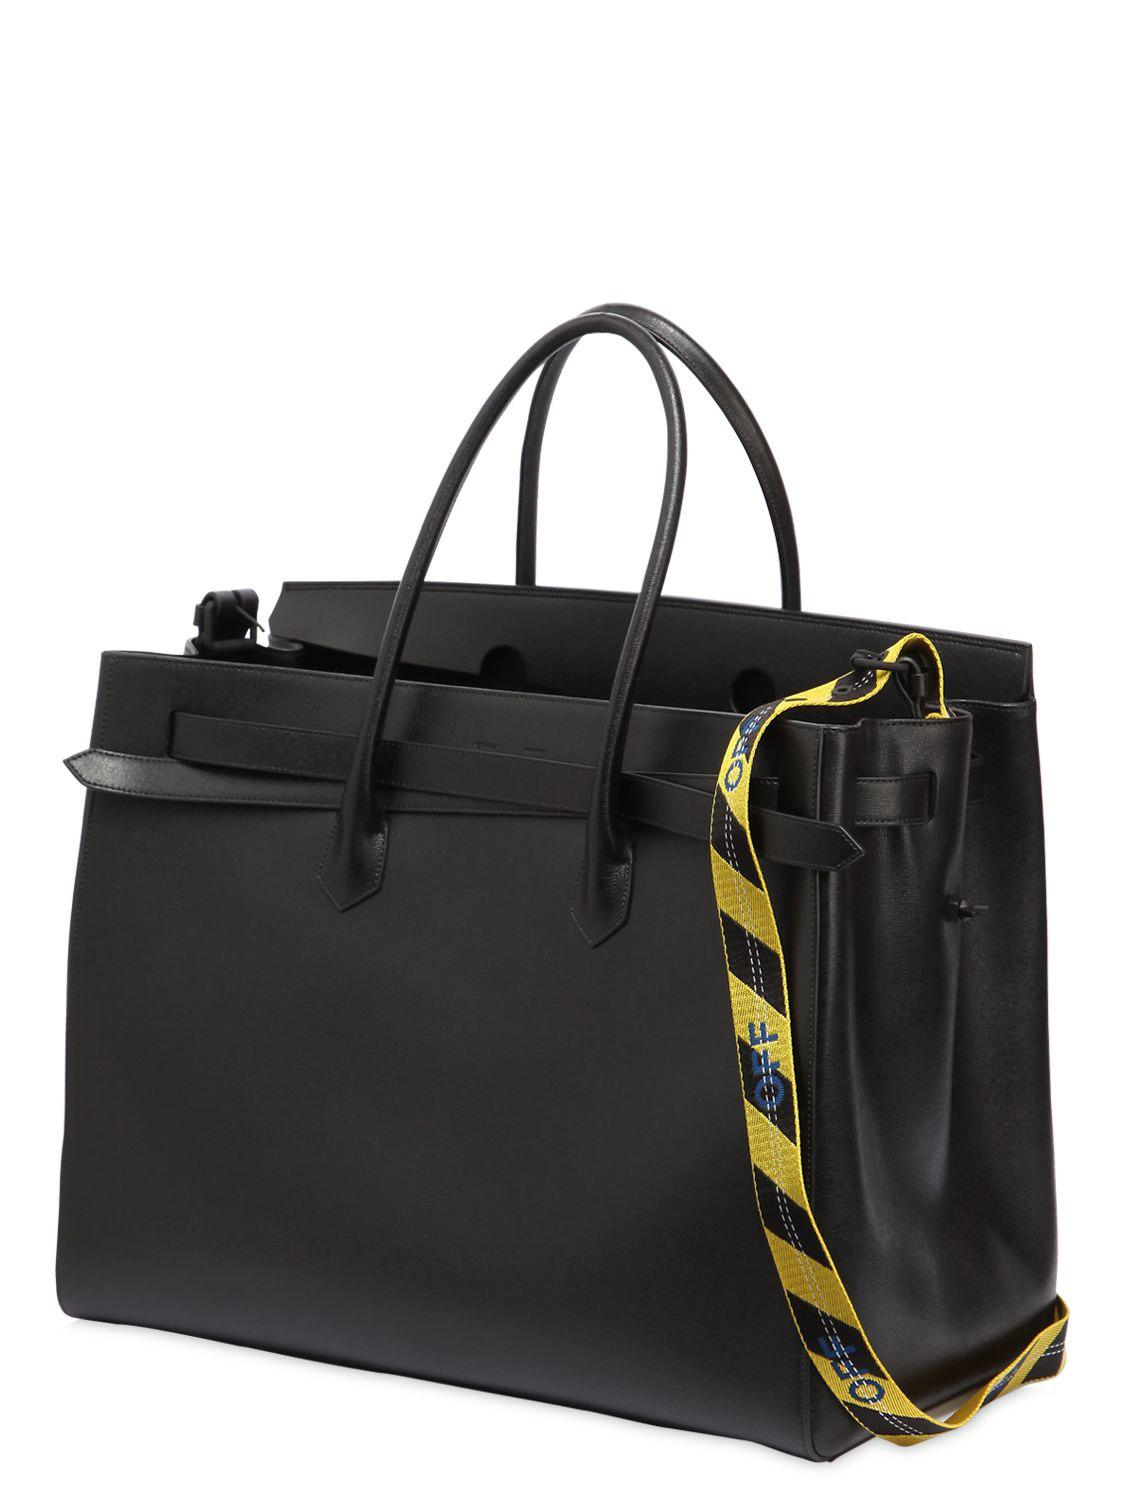 Off-White c/o Virgil Abloh Xl Techno Fabric & Leather Tote Bag in Black - Lyst